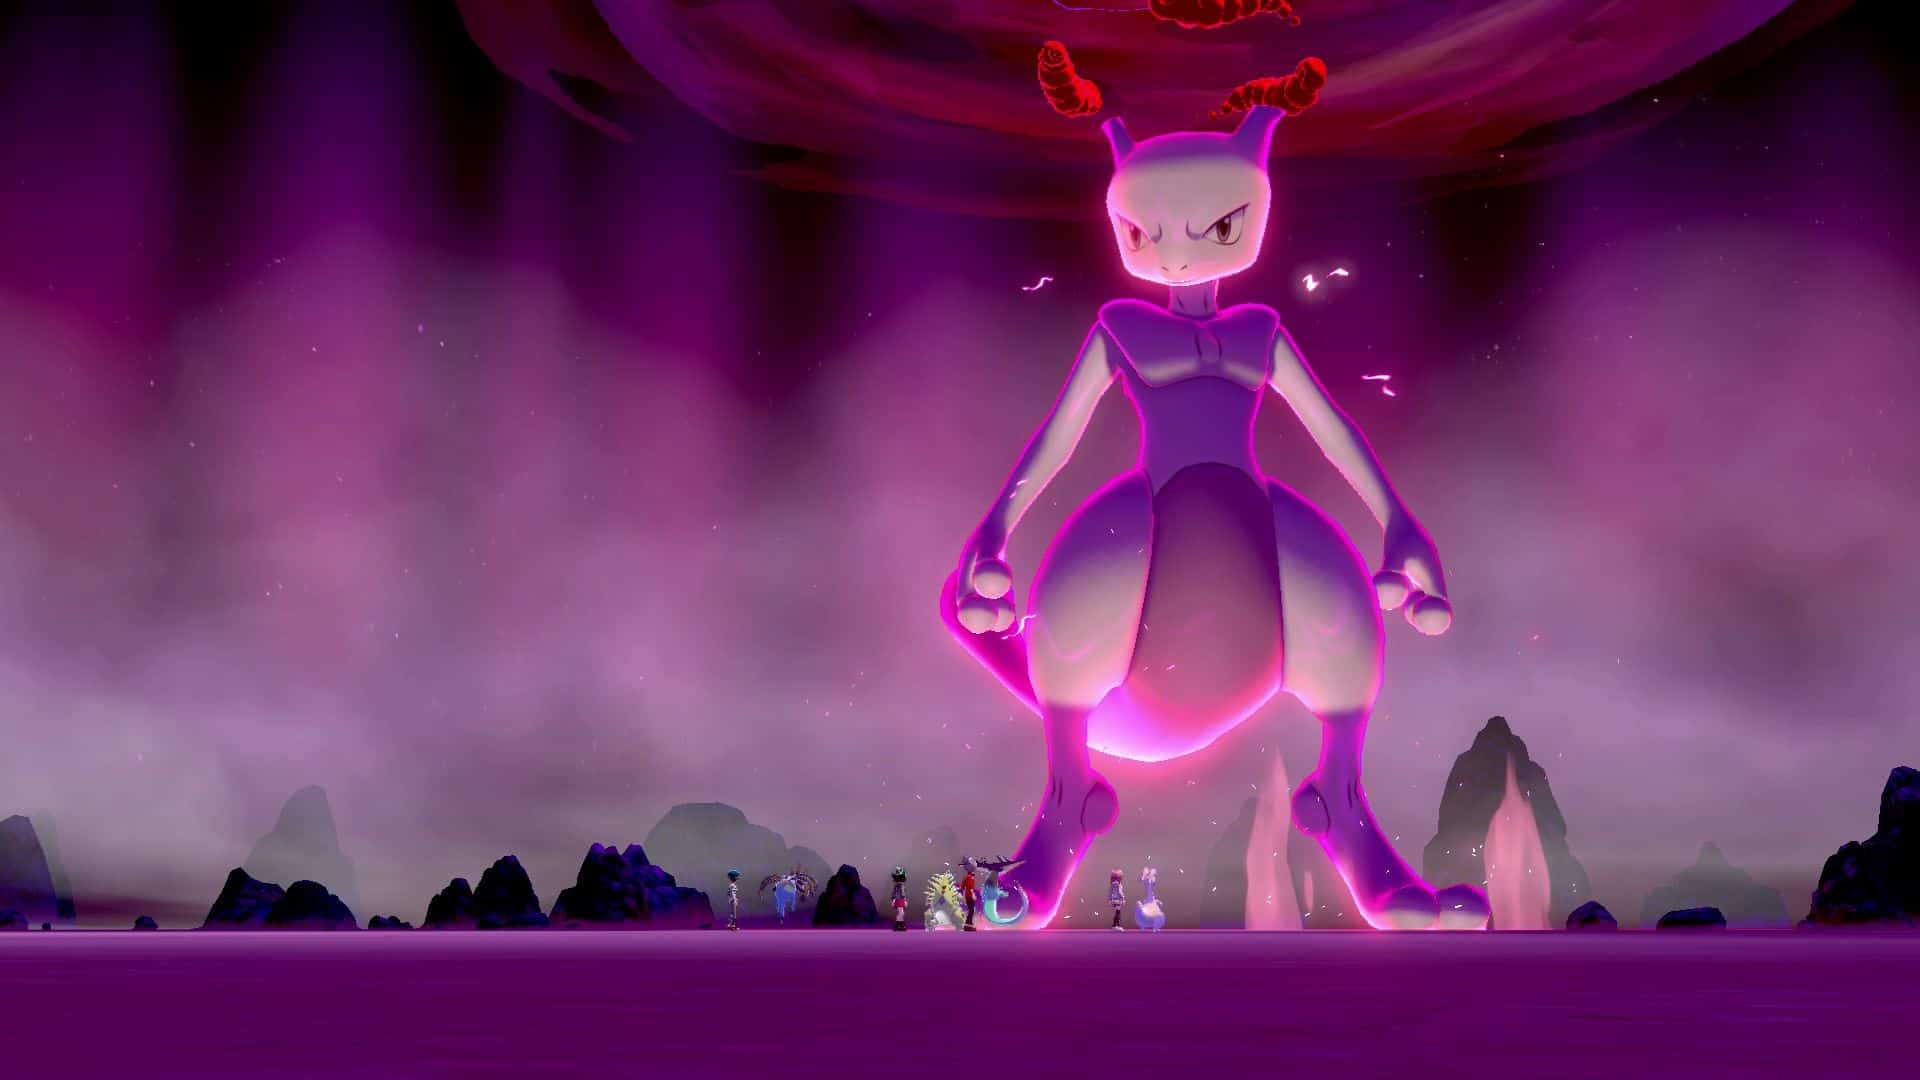 A screenshot showing Mewtwo from Pokemon Sword and Shield.